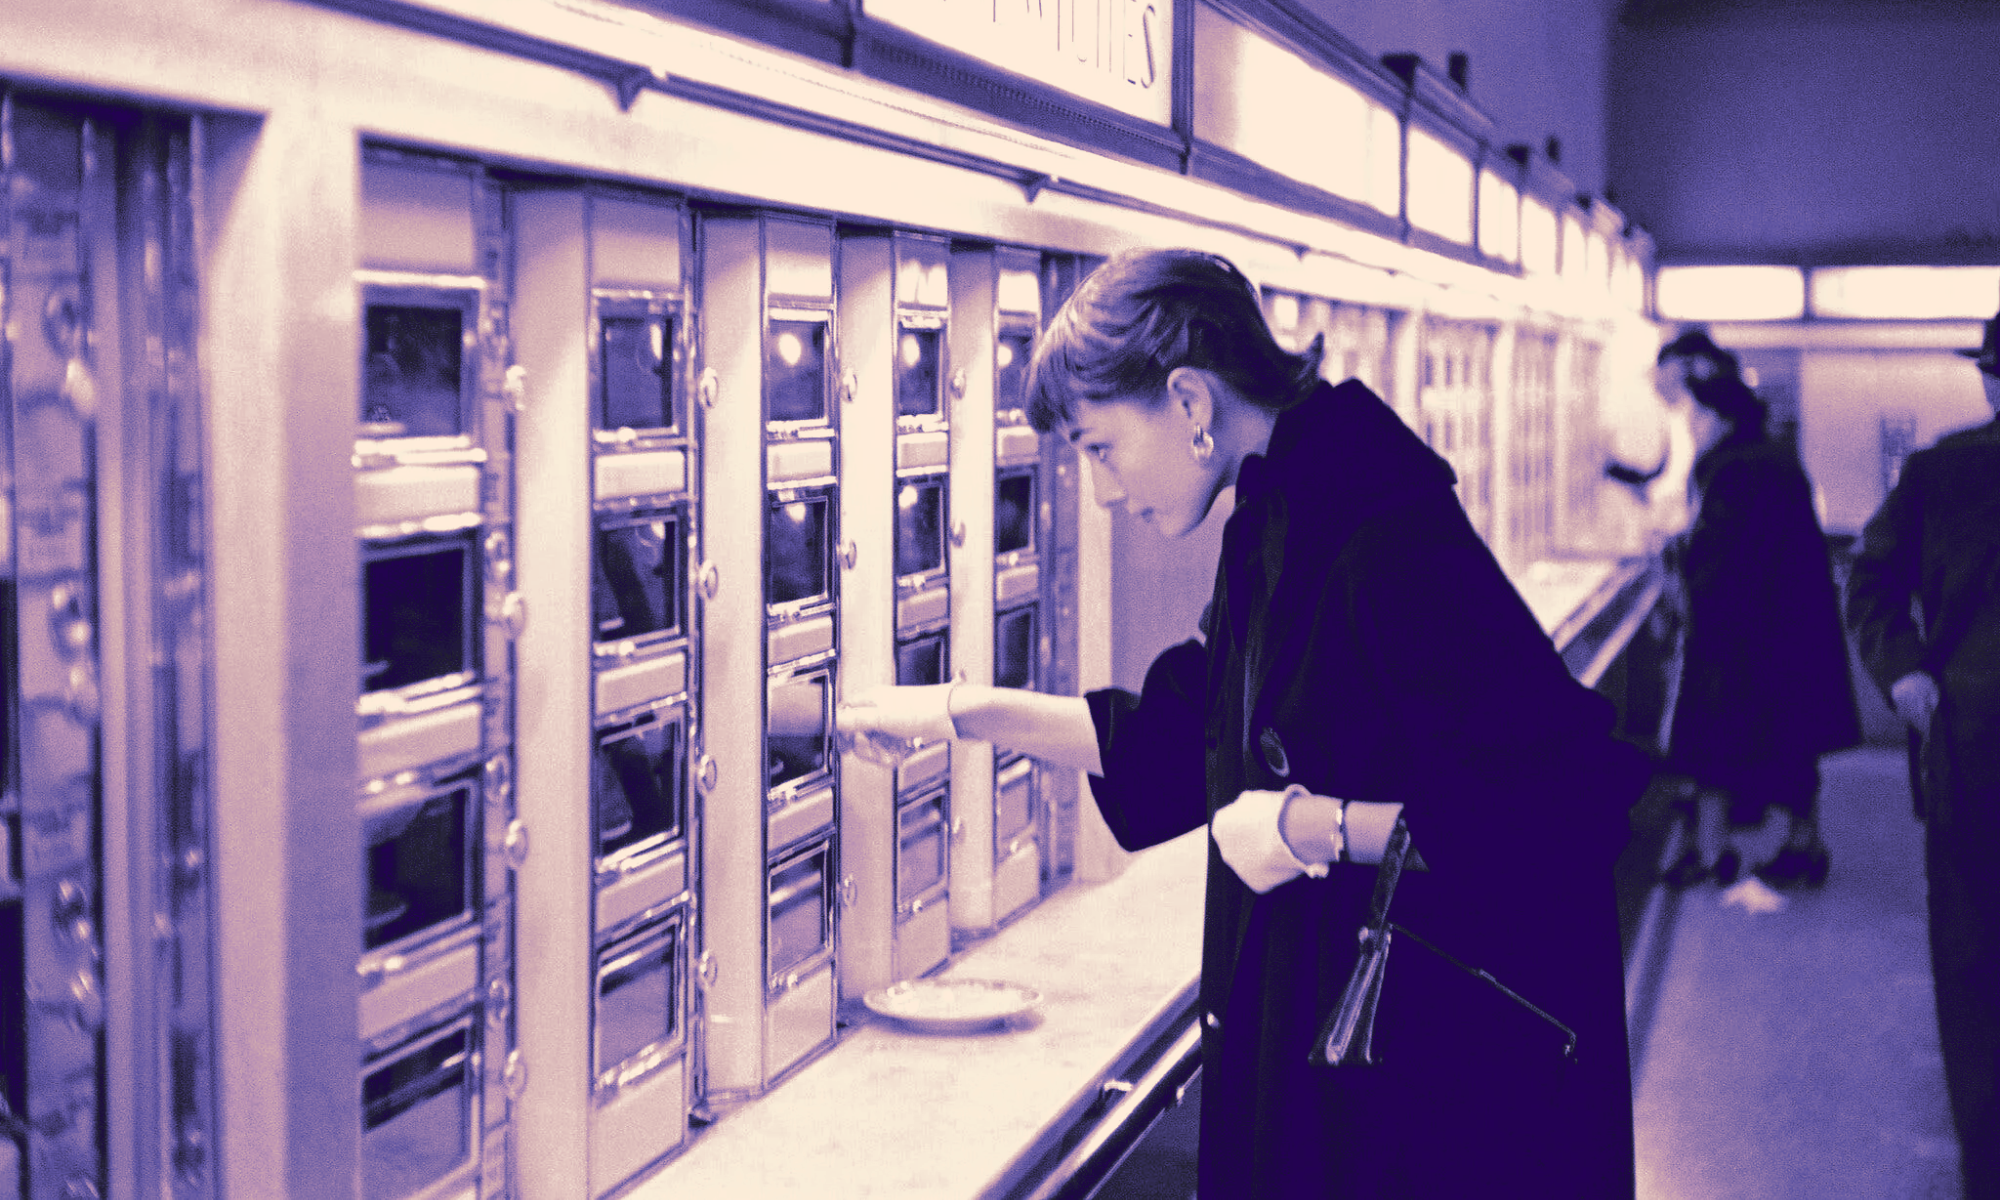 Vintage automat in which a woman chooses fresh food from a vending machine